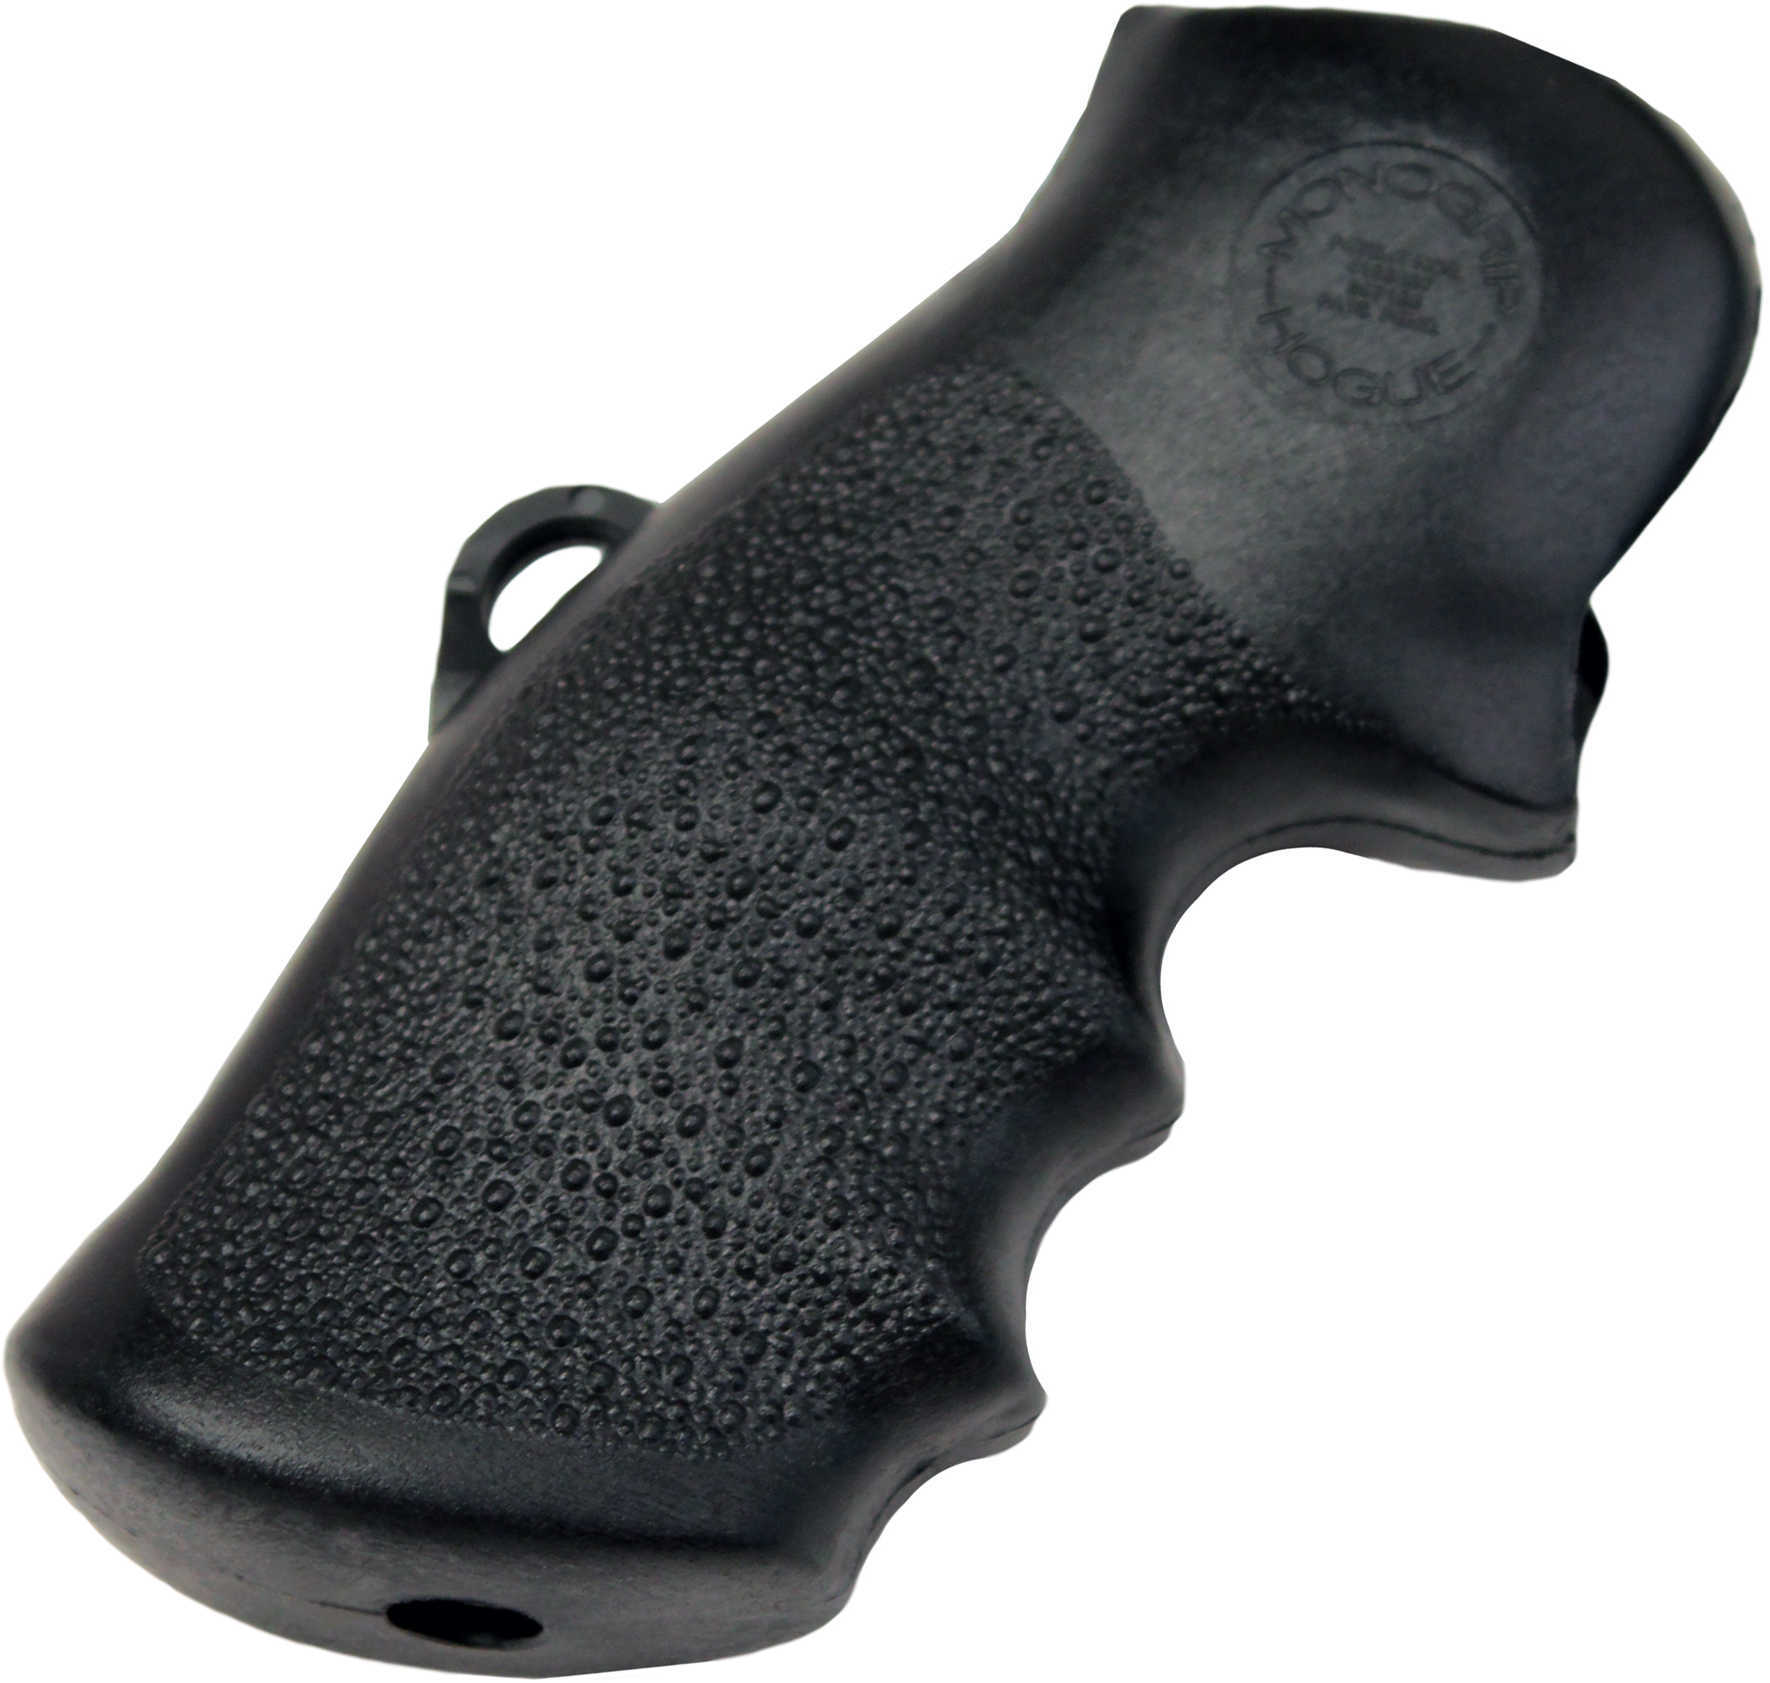 Hogue S&W K or L Frame Square Butt Grips Nylon Monogrip 10100